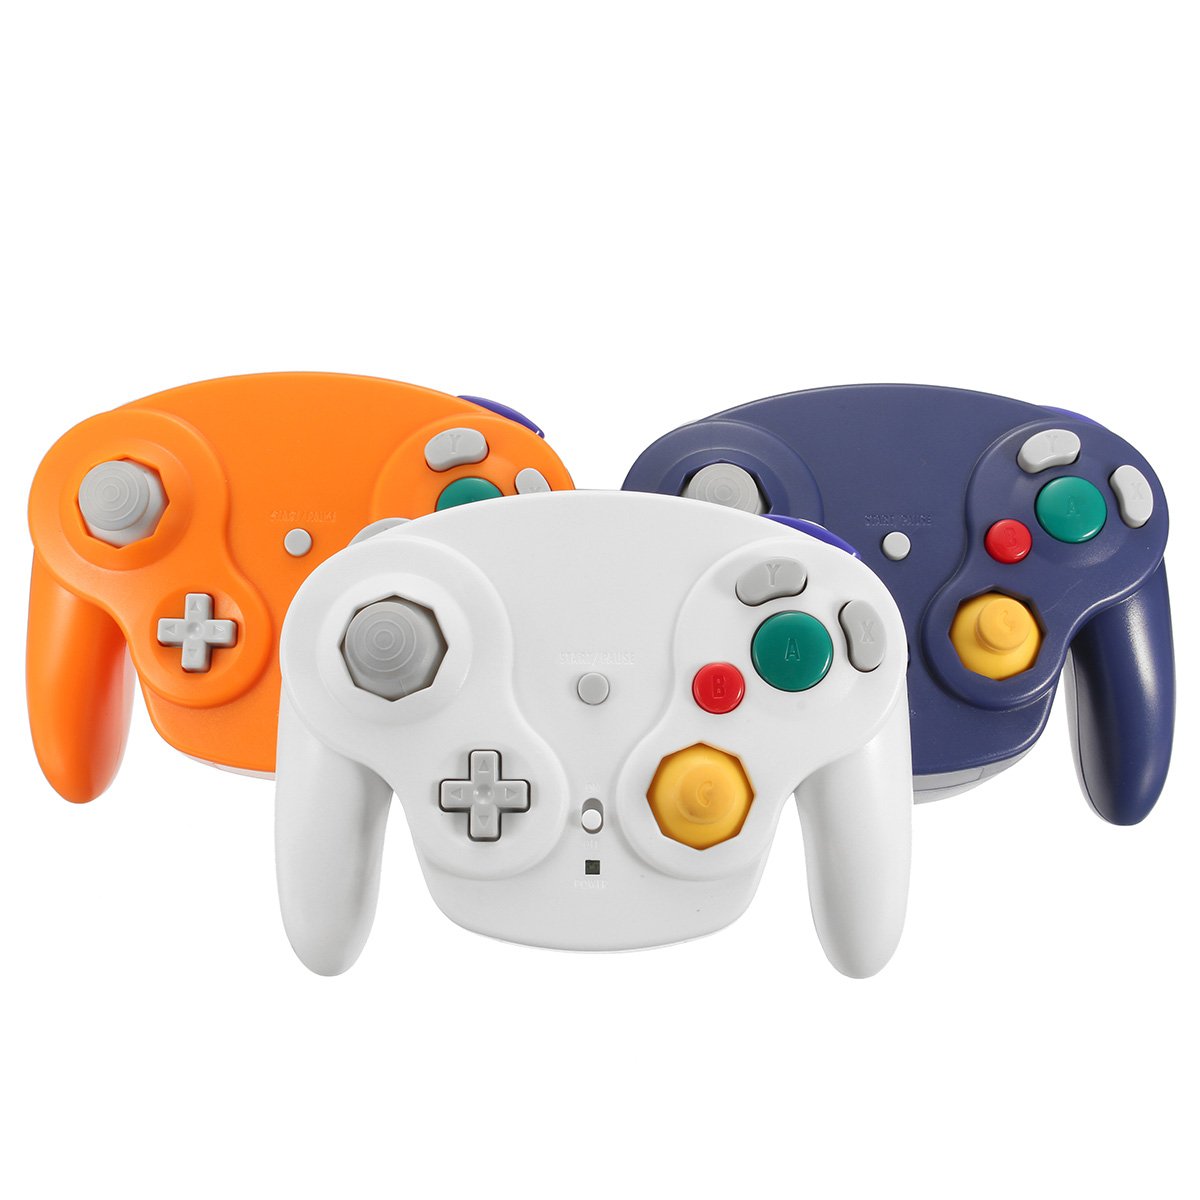 2.4Ghz Wireless Controller Game Gamepad For Nintendo Gamecube NGC Wii 1